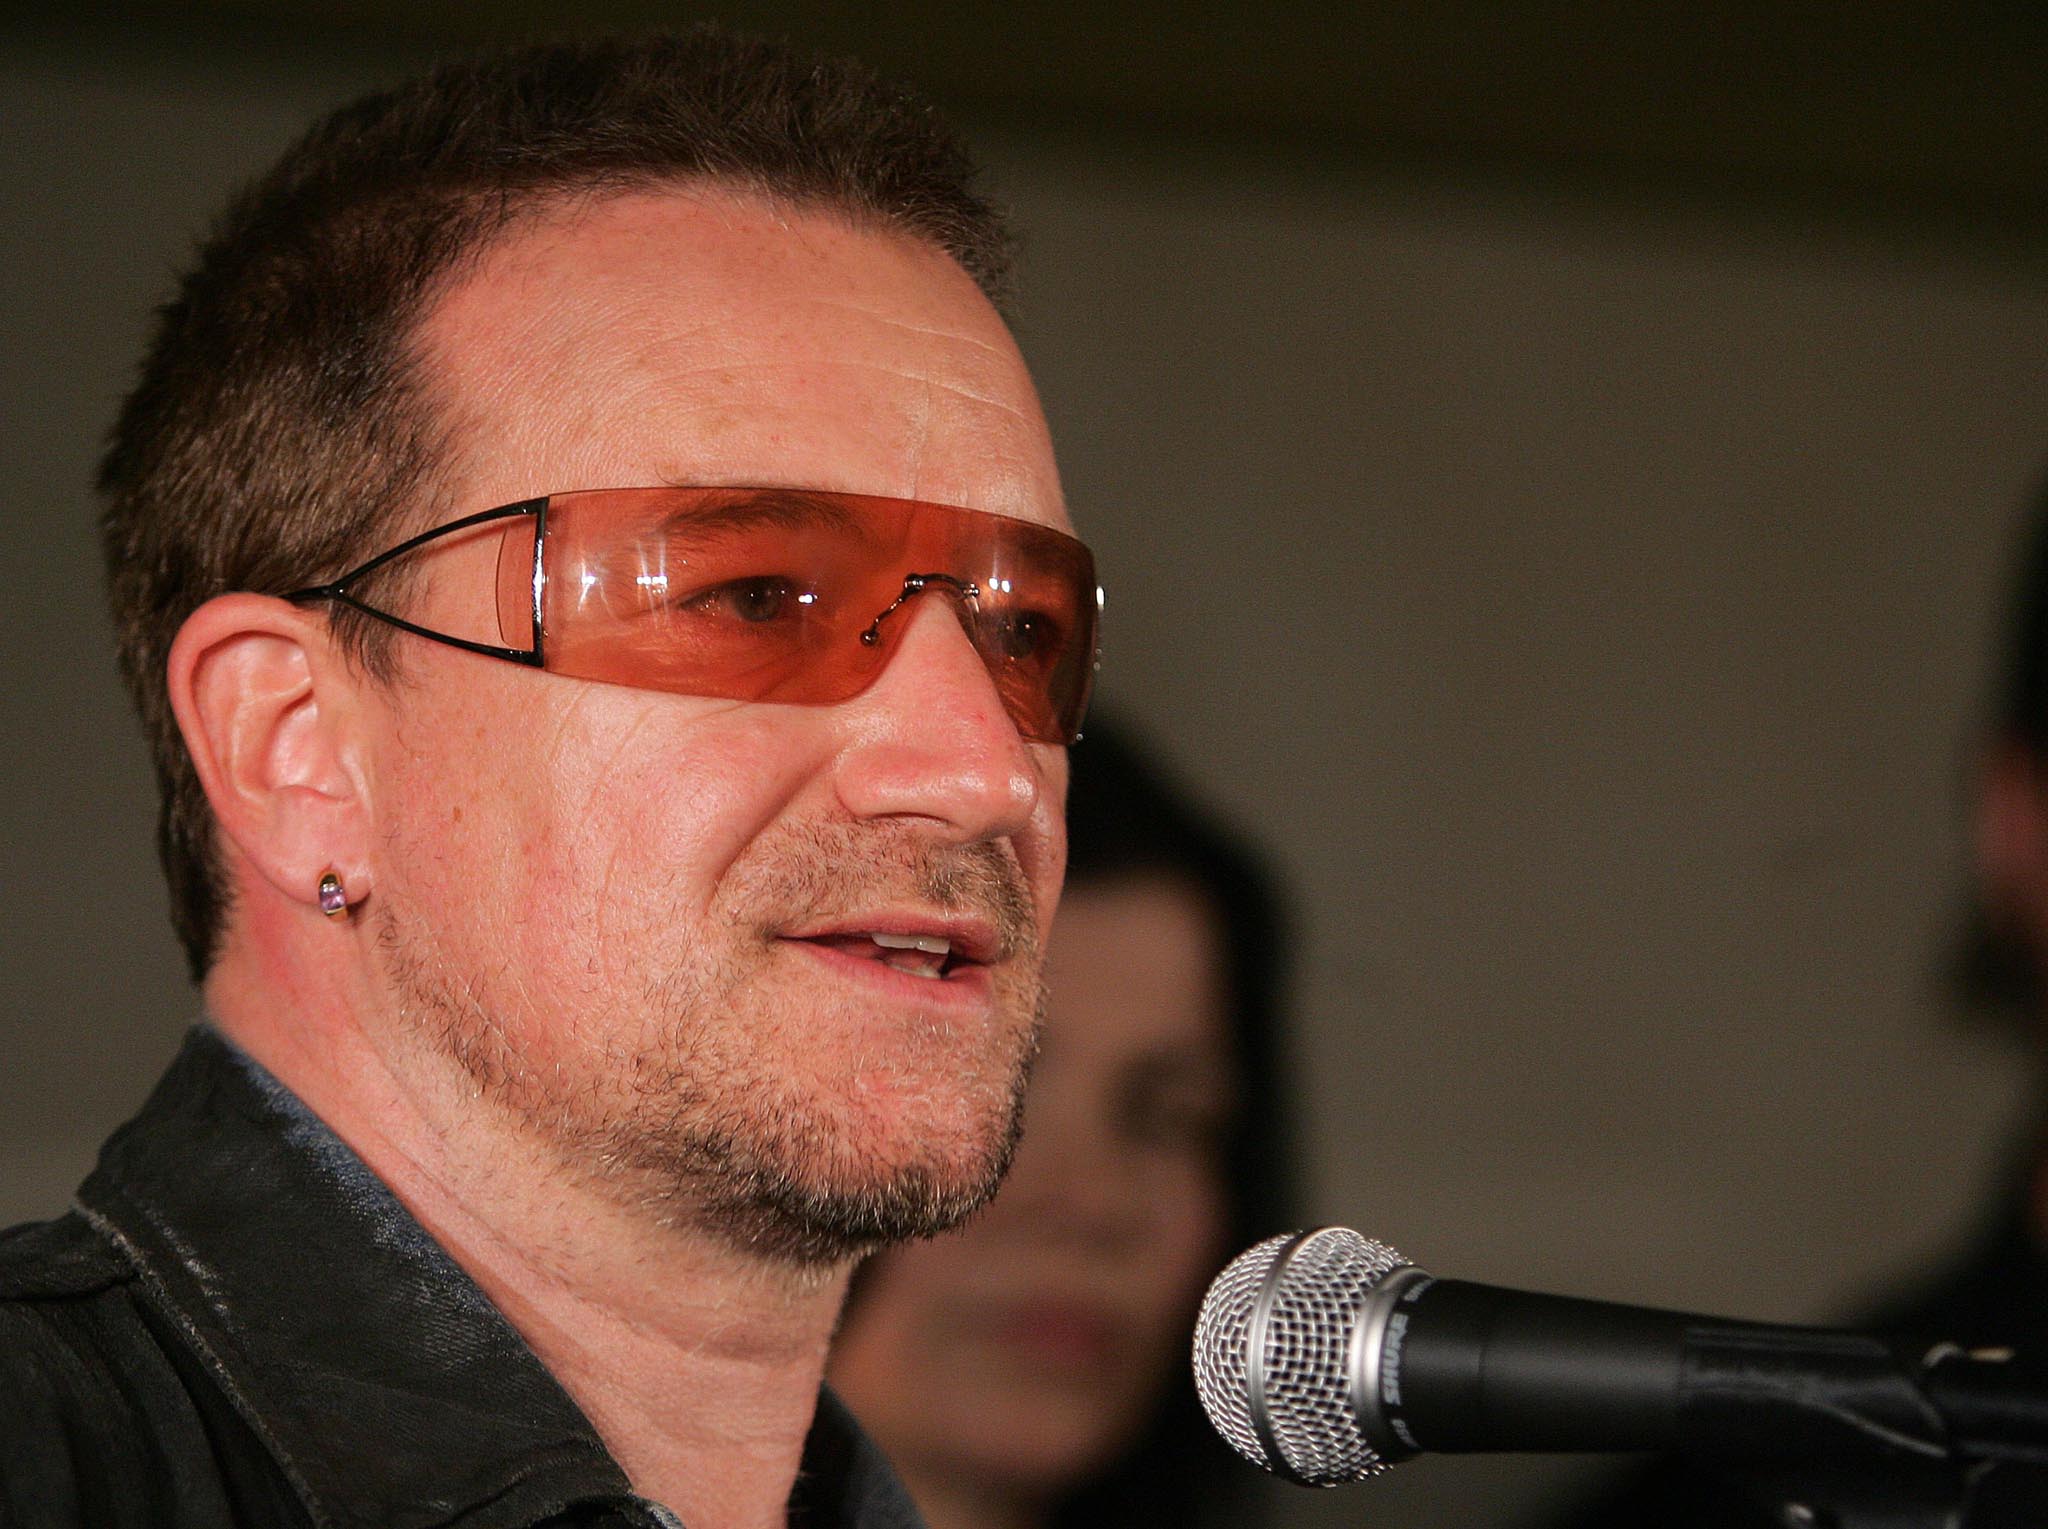 bono-wears-sunglasses-because-he-suffers-from-glaucoma-the-independent